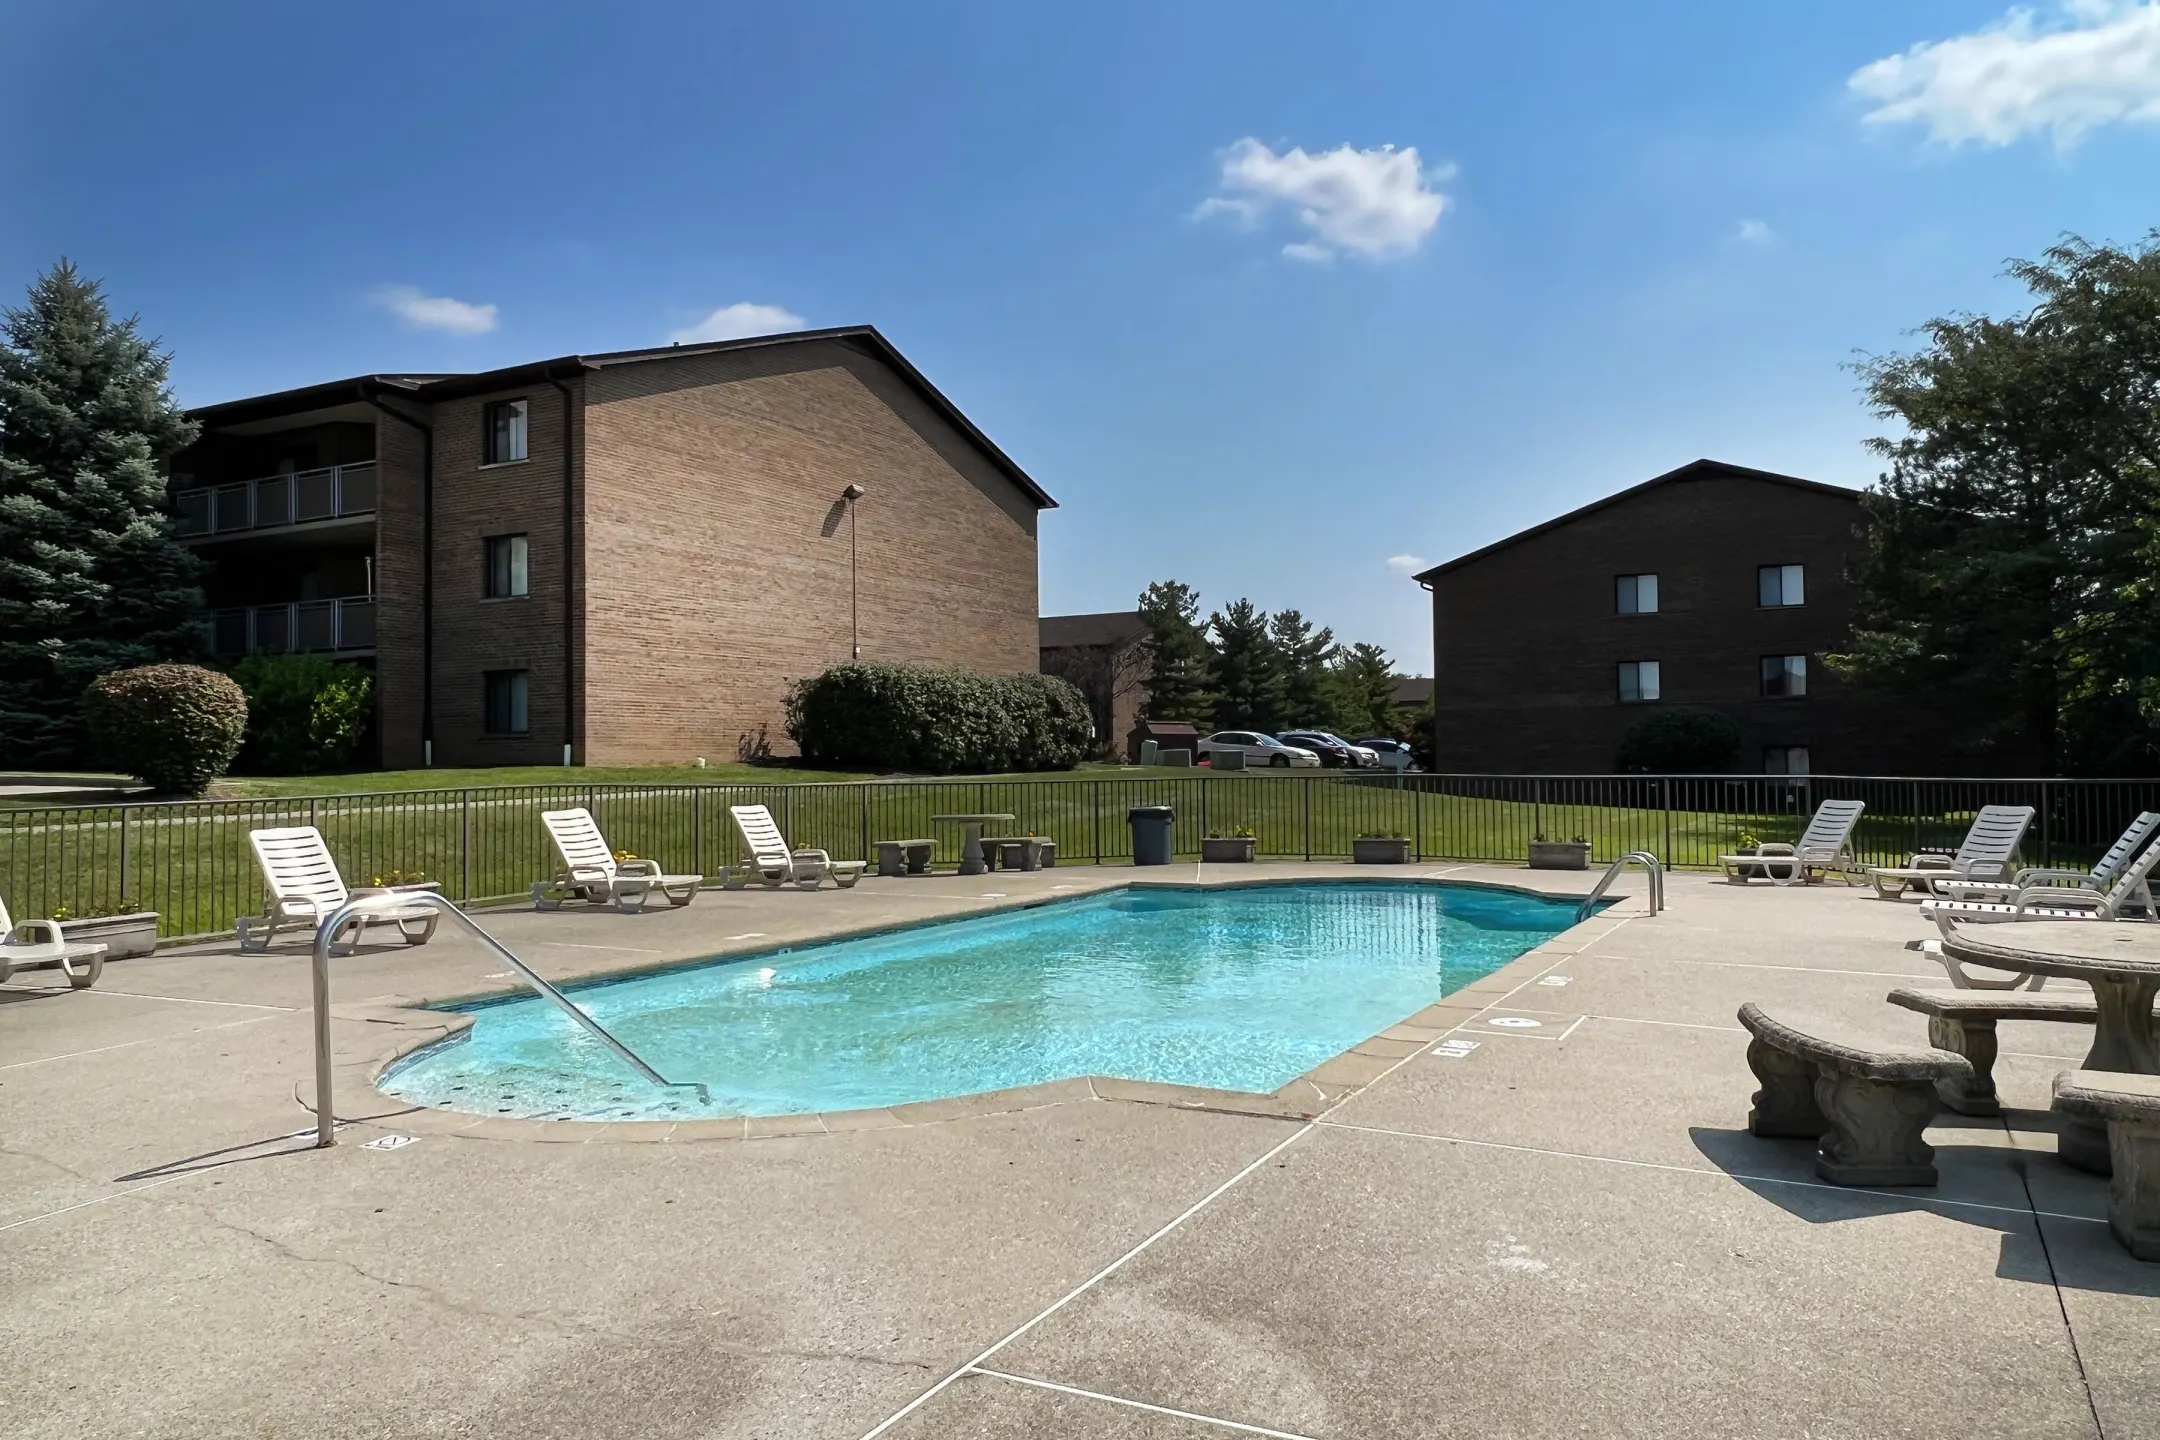 Pool - Colonial Village Apartments - Crescent Springs, KY